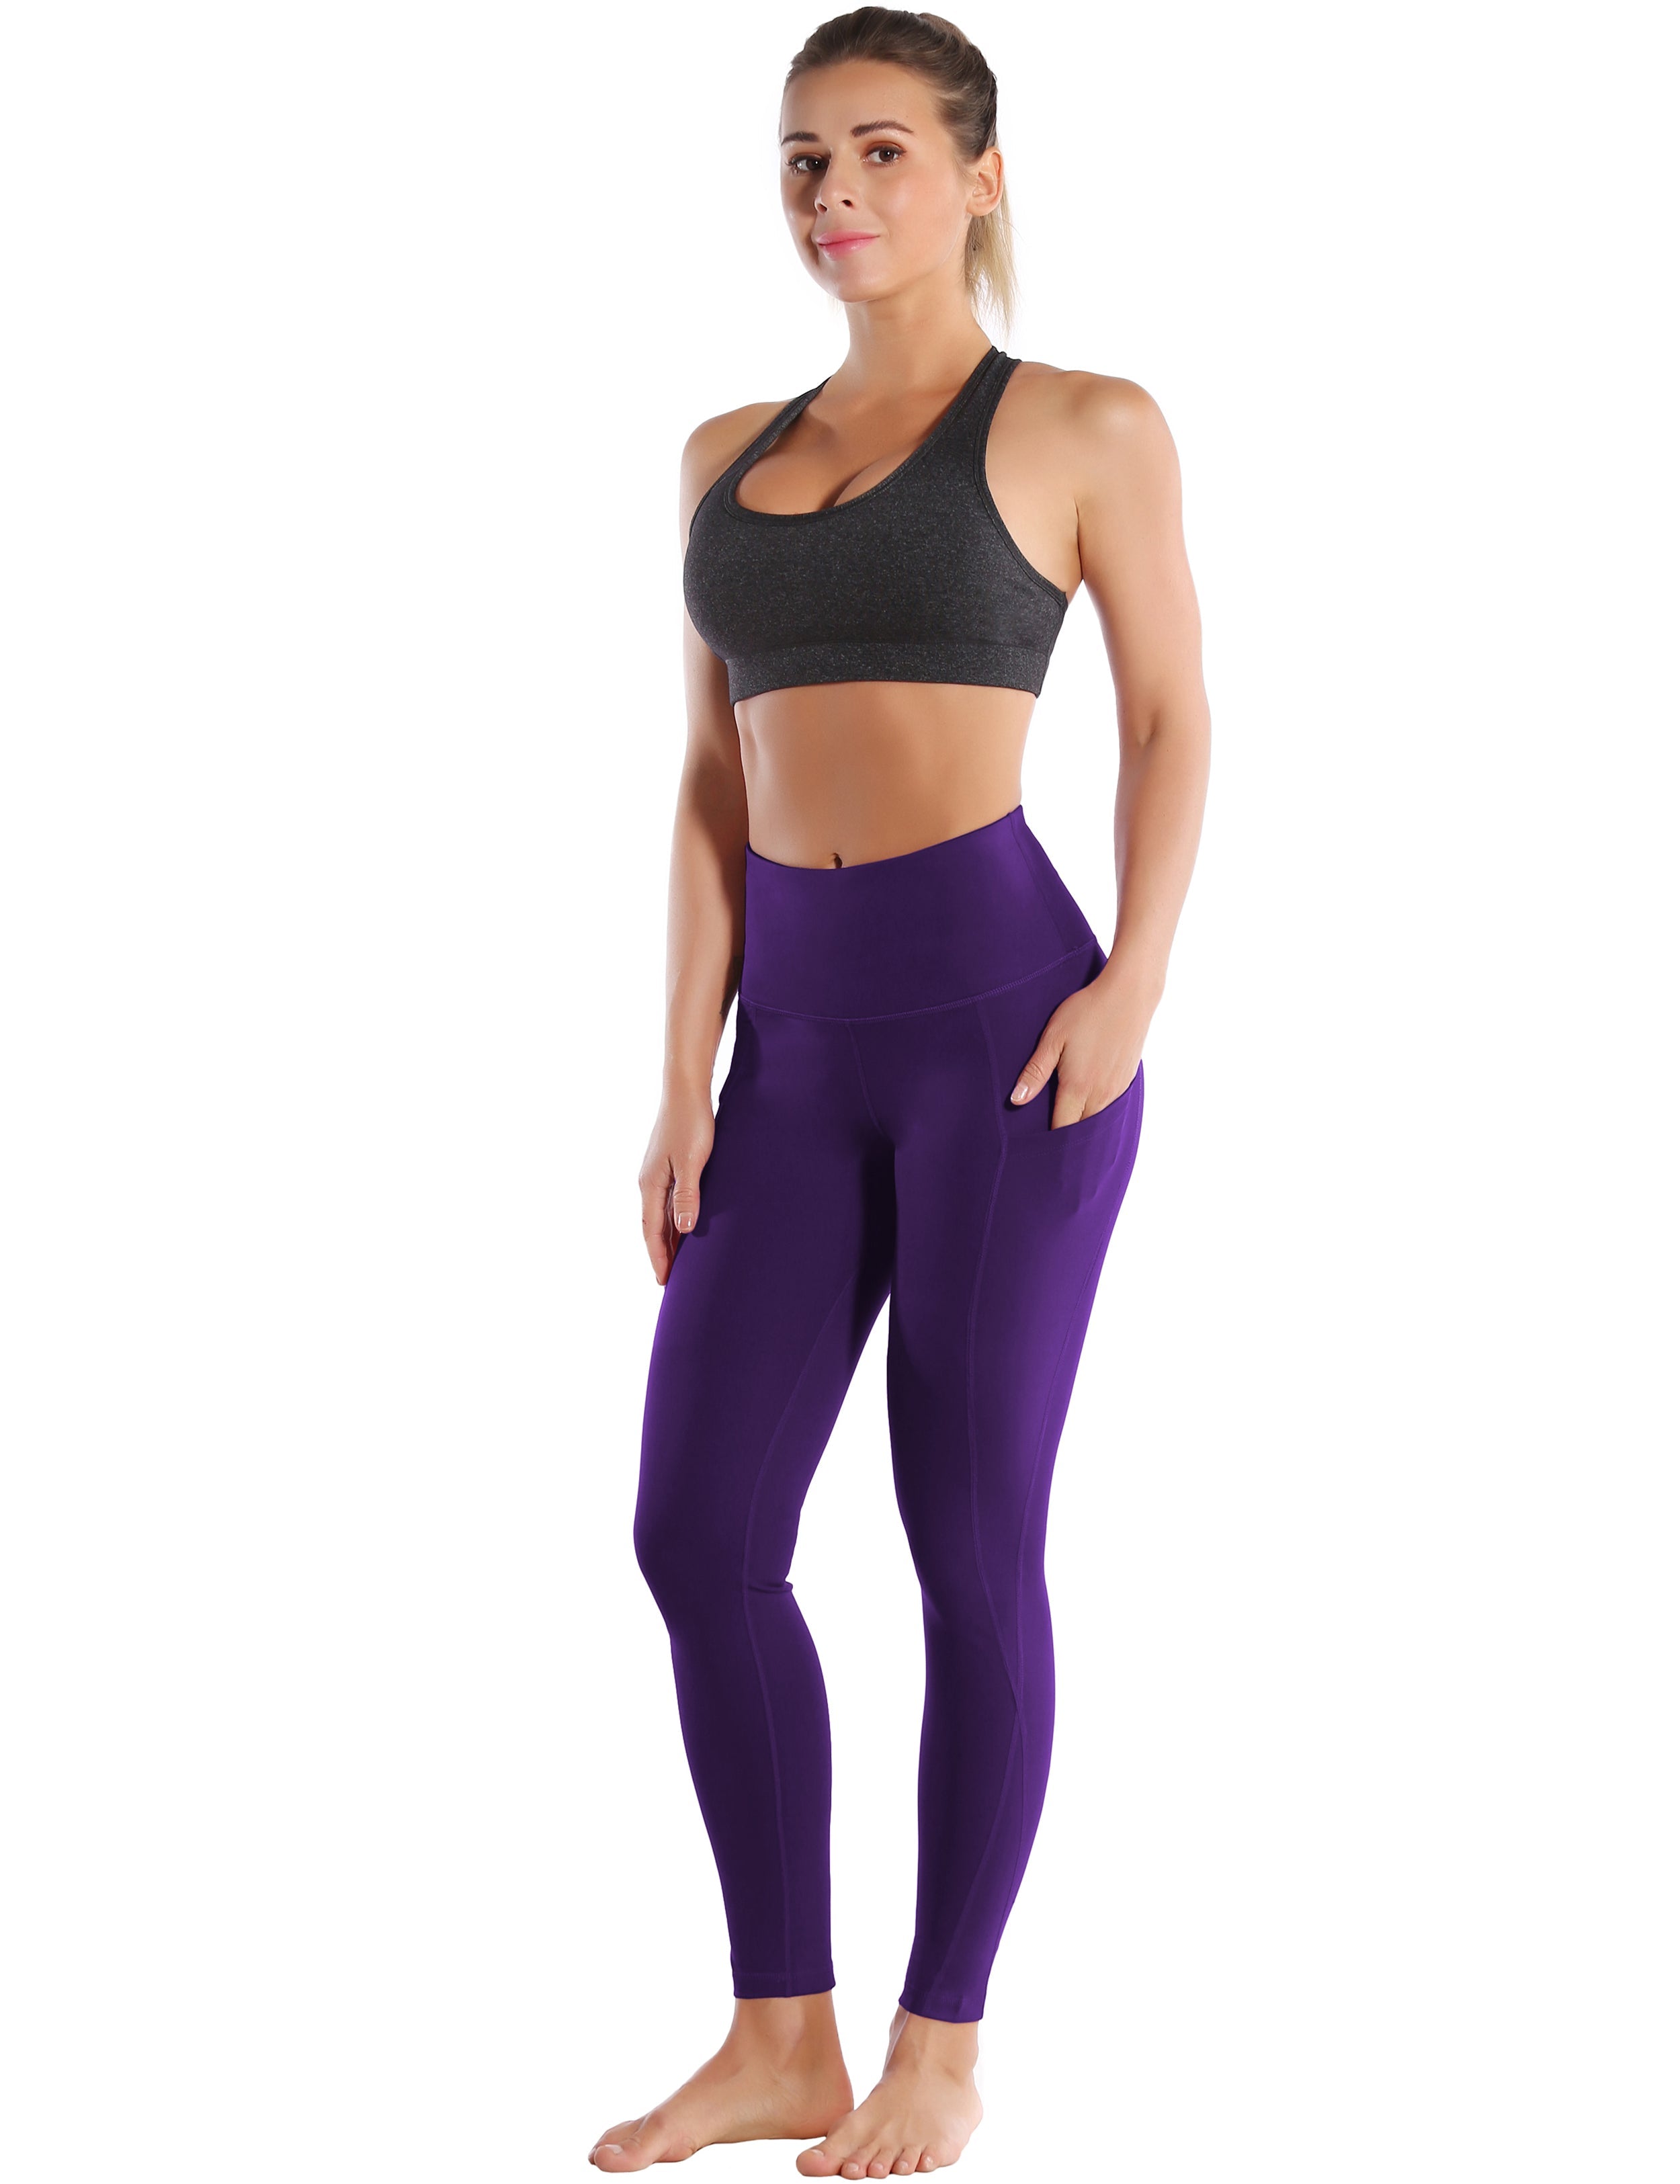 High Waist Side Pockets Jogging Pants grapevine 75% Nylon, 25% Spandex Fabric doesn't attract lint easily 4-way stretch No see-through Moisture-wicking Tummy control Inner pocket